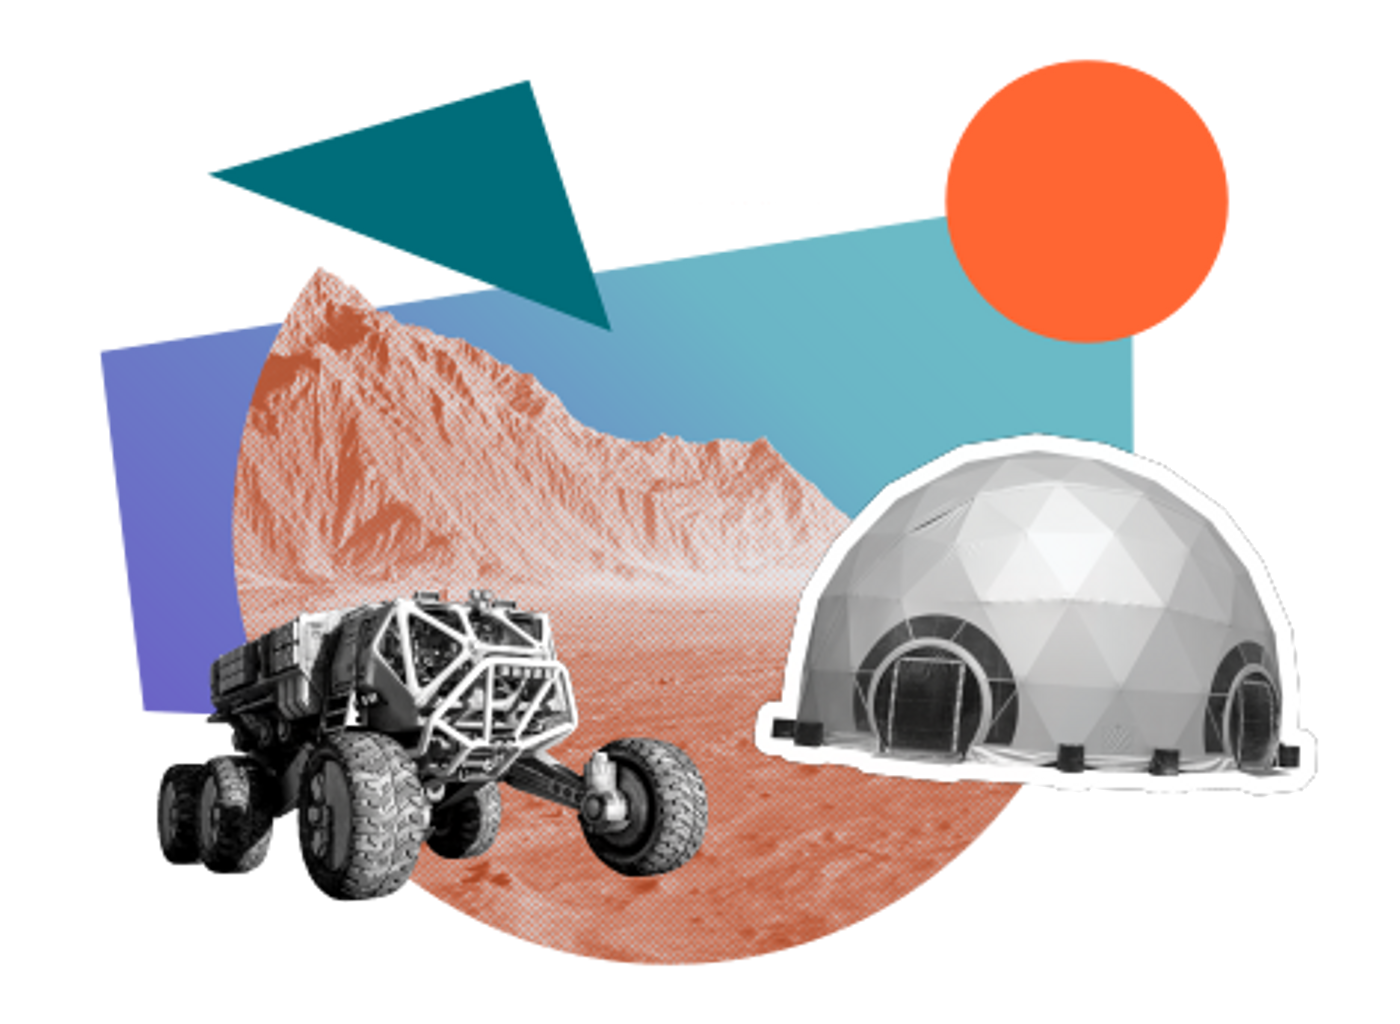 A space base and Mars rover surrounded by colourful shapes